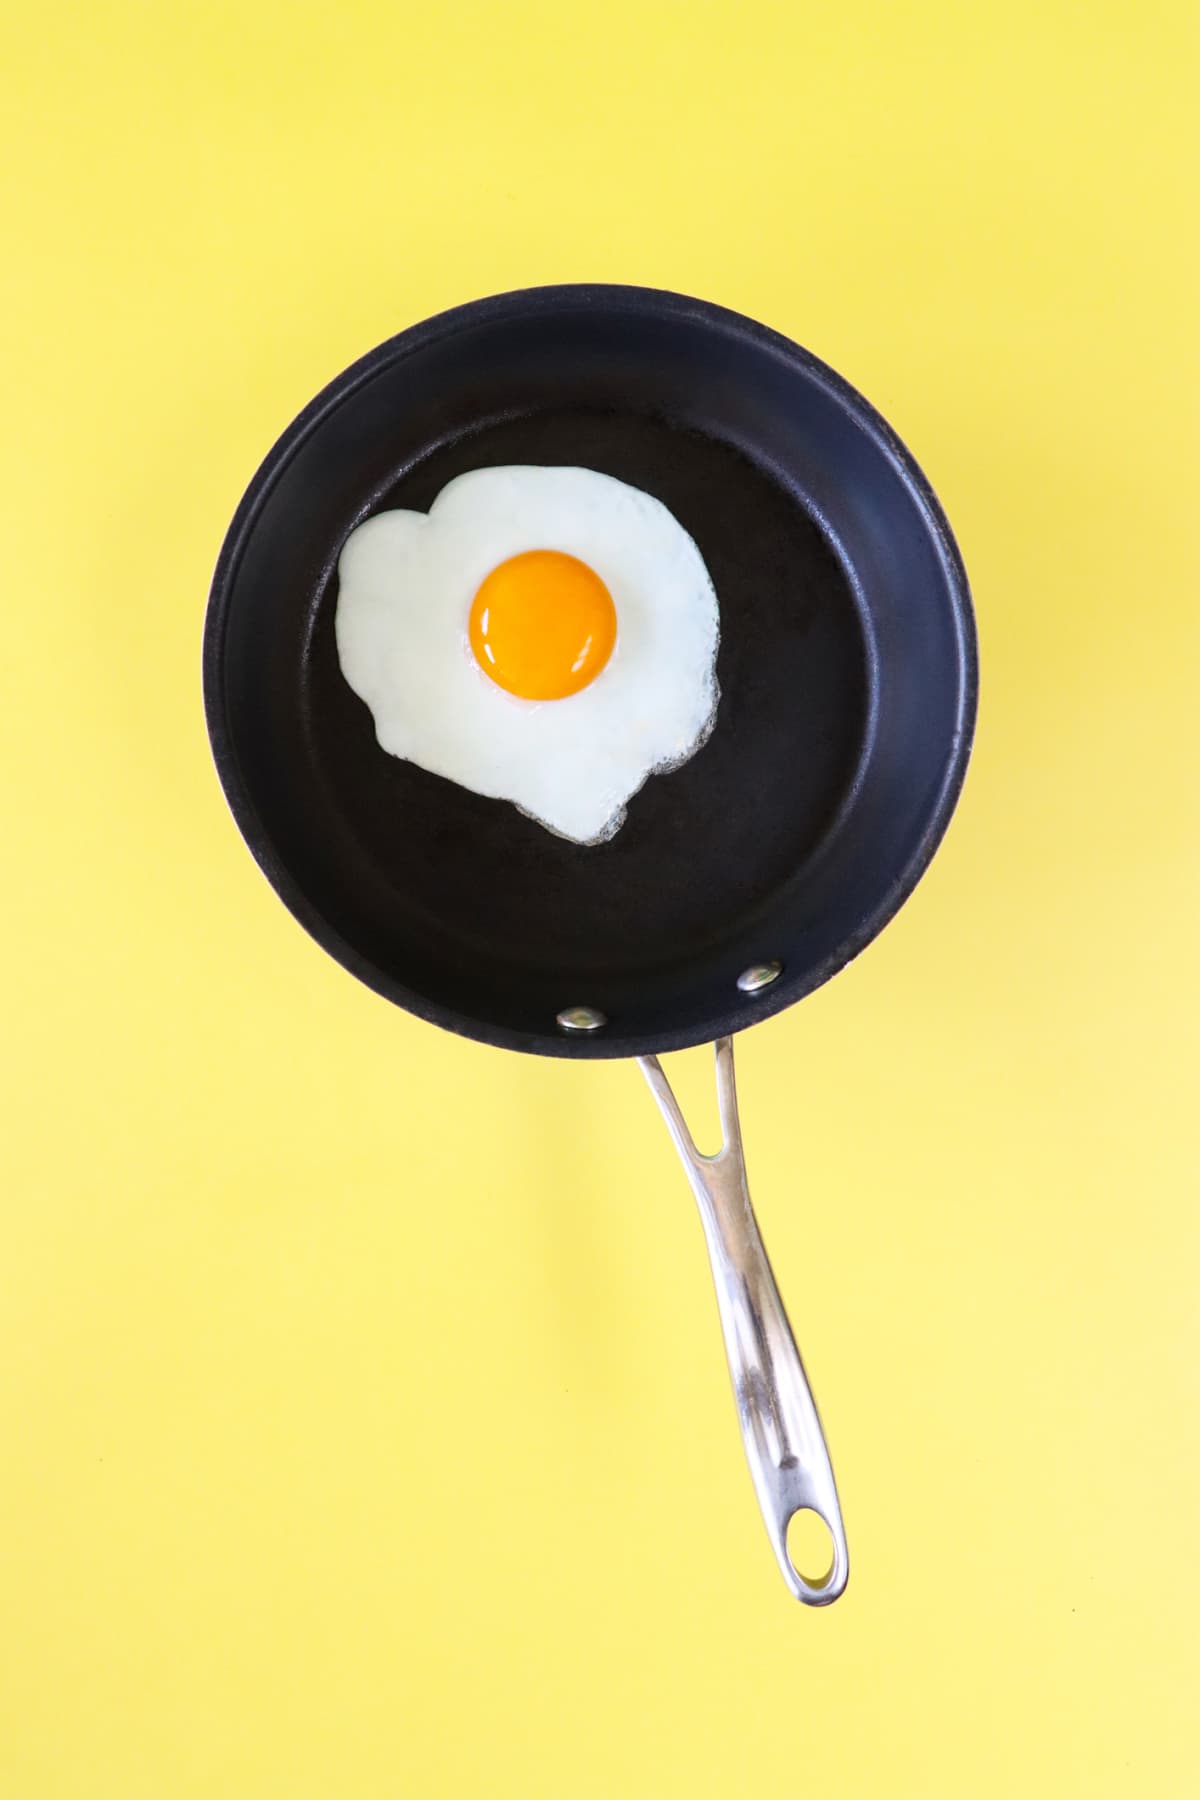 Stock photo showing an elevated view of sunny side up fried egg in a non-stick frying pan against a yellow background.